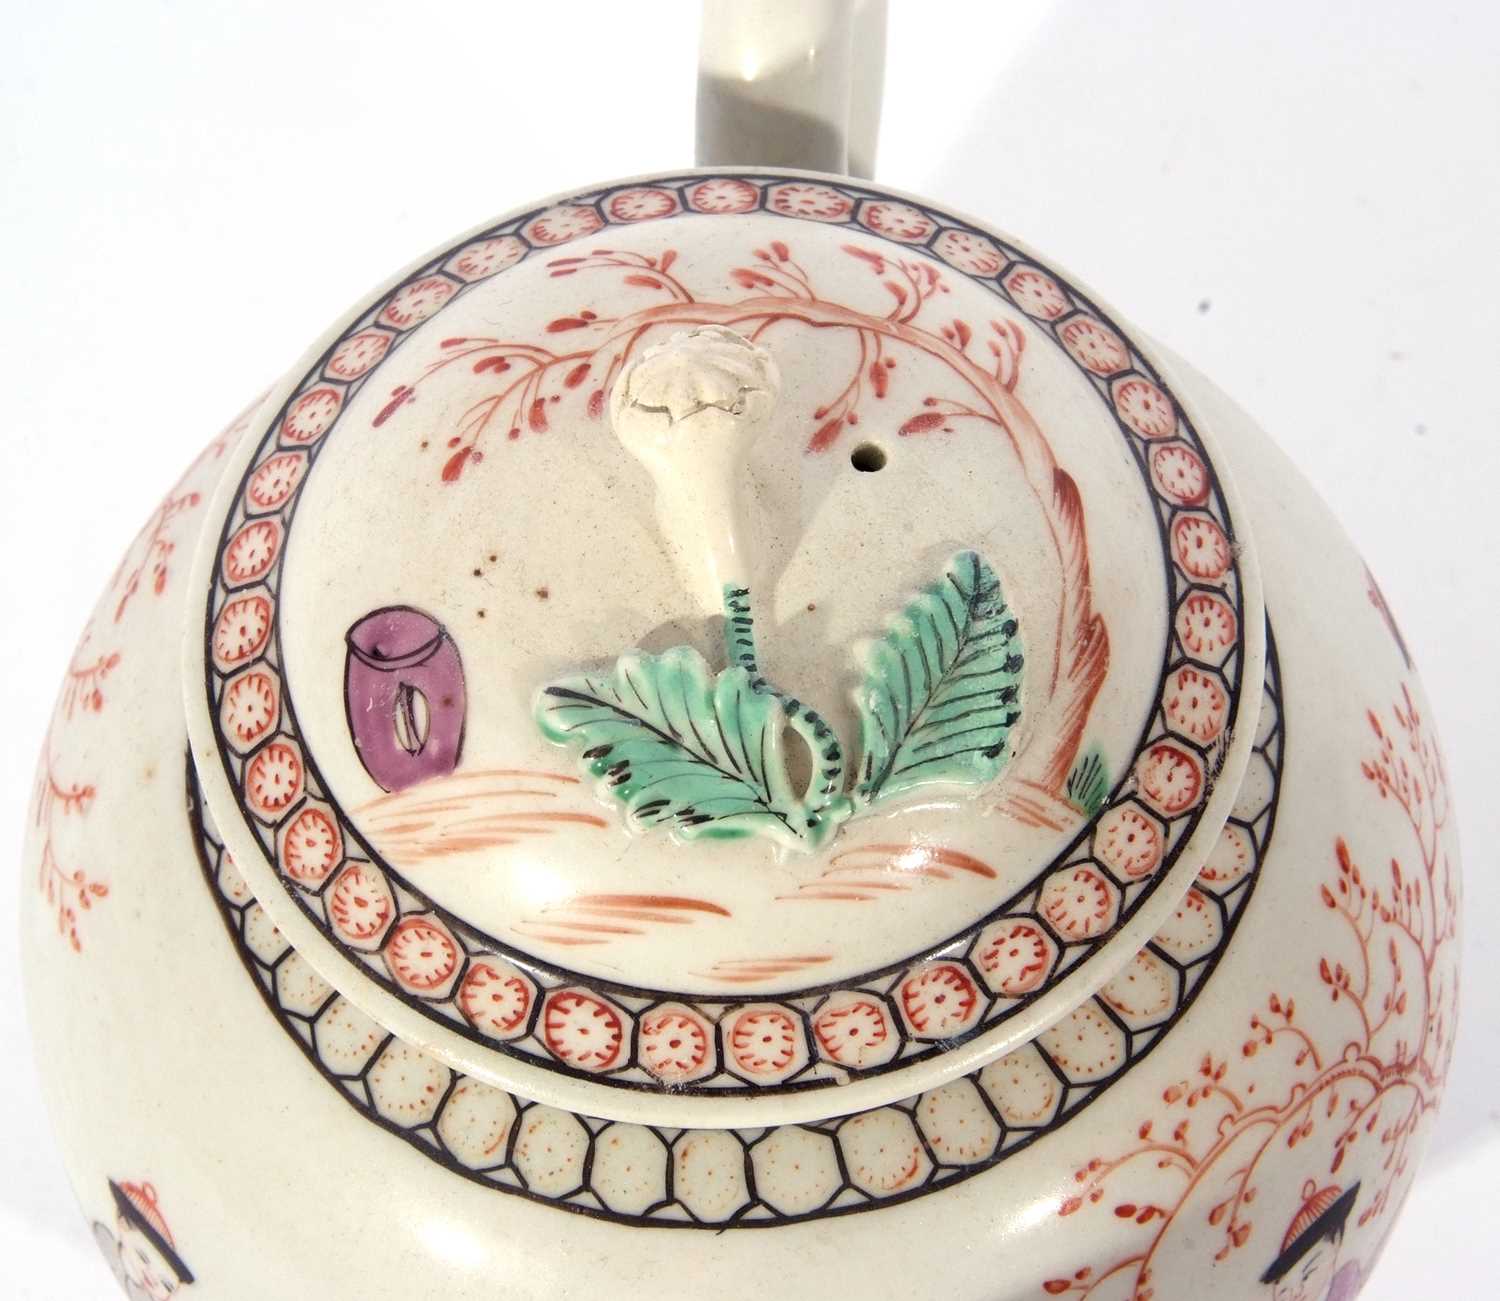 Lowestoft porcelain tea pot, circa 1780, with a polychrome design of Chinese figures by a tree, - Image 3 of 8